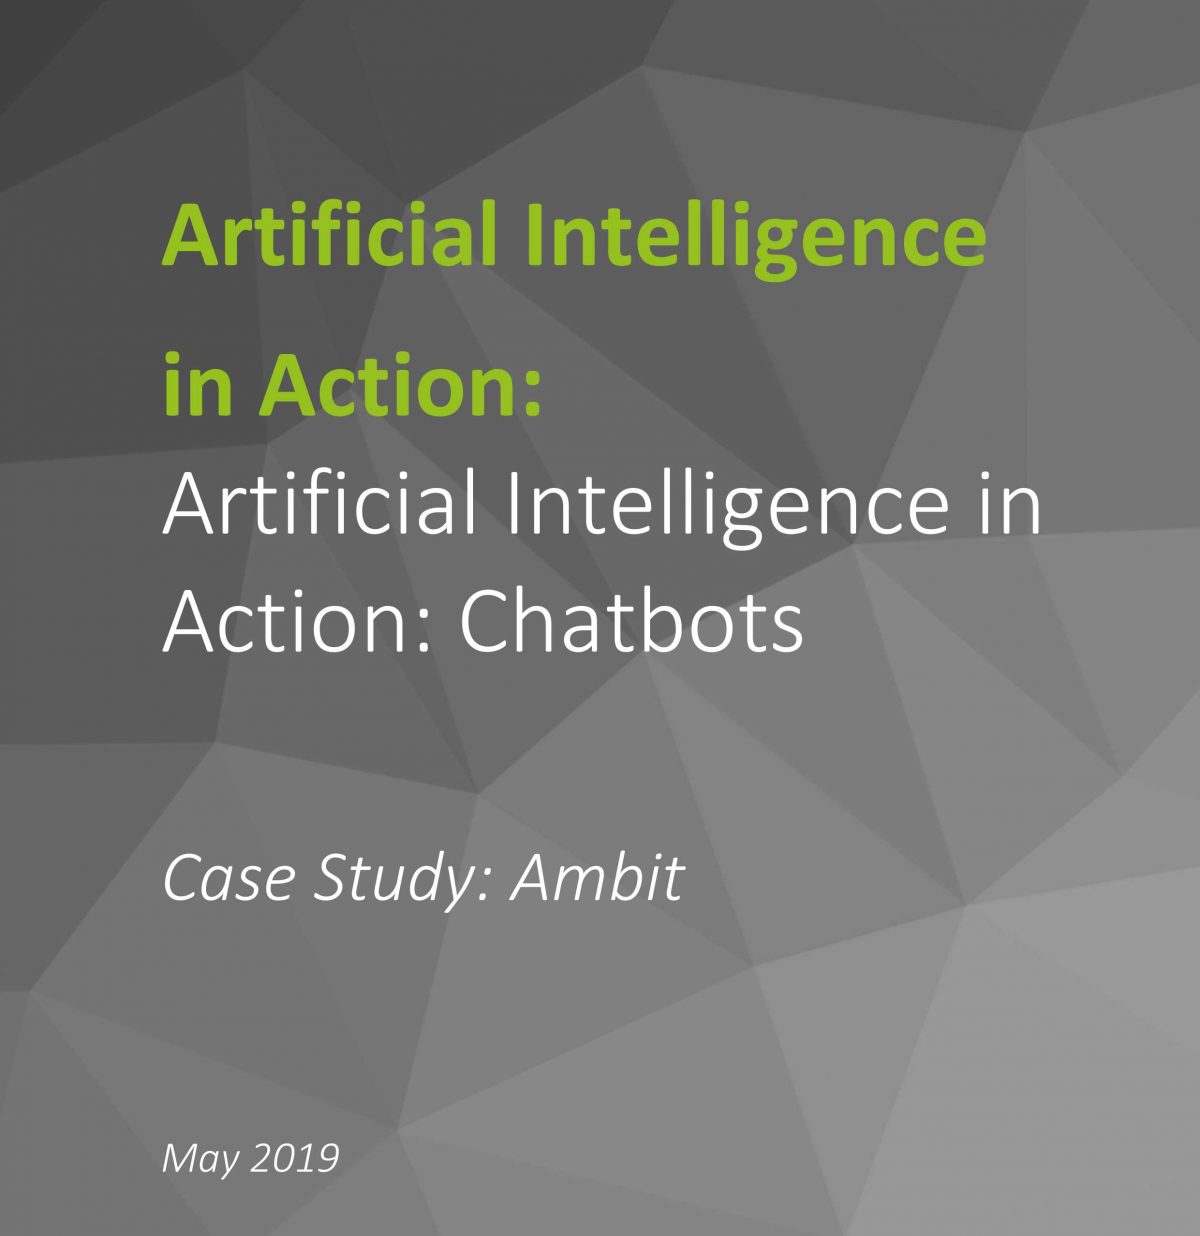 Artificial Intelligence in Action: Chatbots